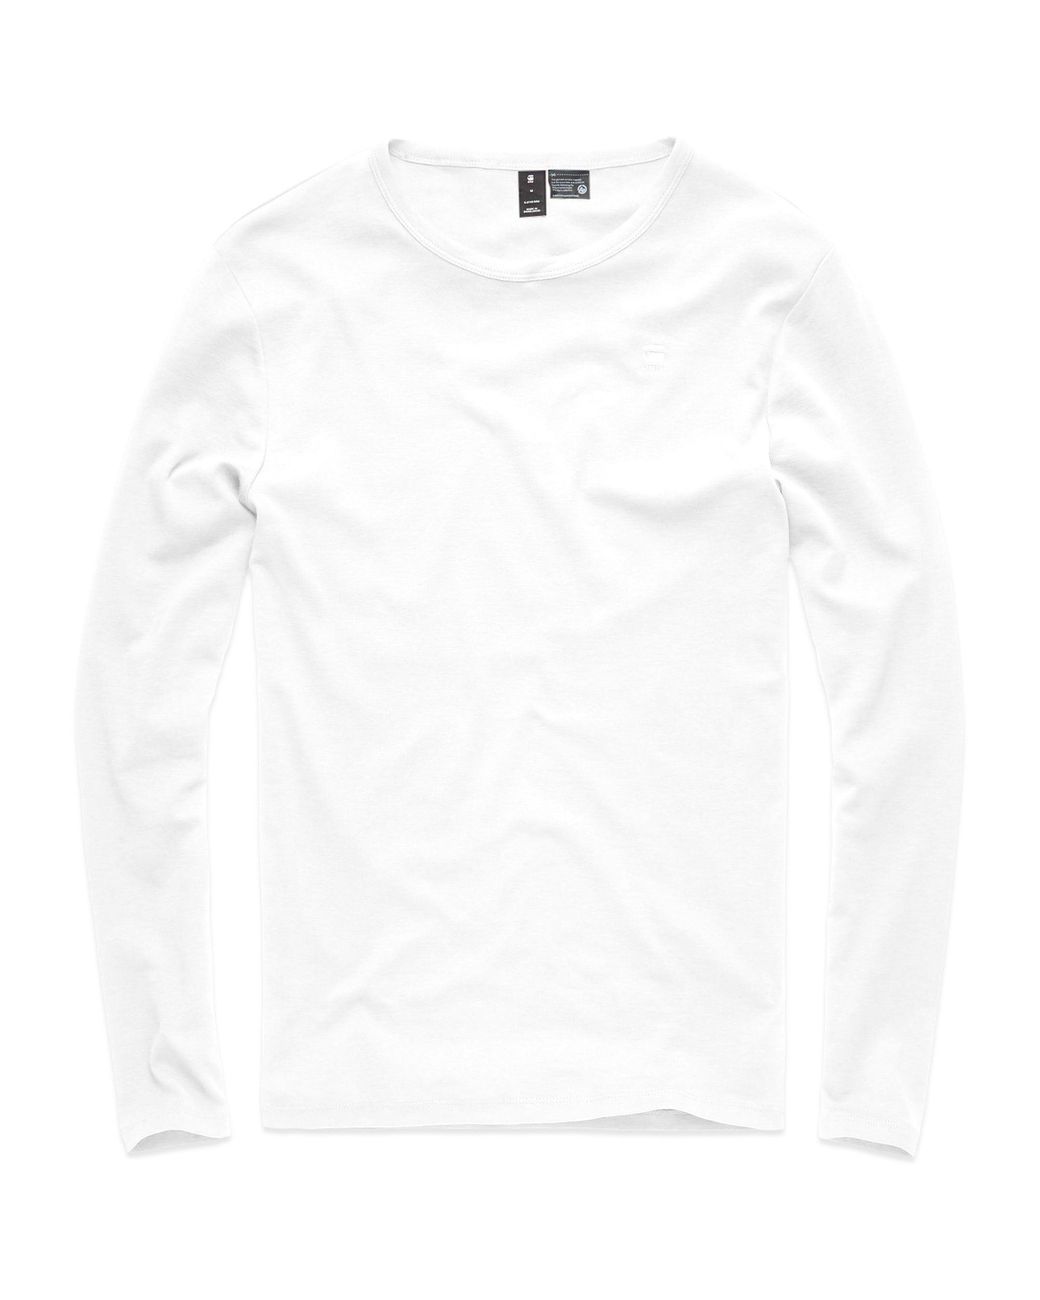 G-Star RAW Cotton G-star Base Round Neck Long Sleeve T-shirt in White for  Men - Lyst